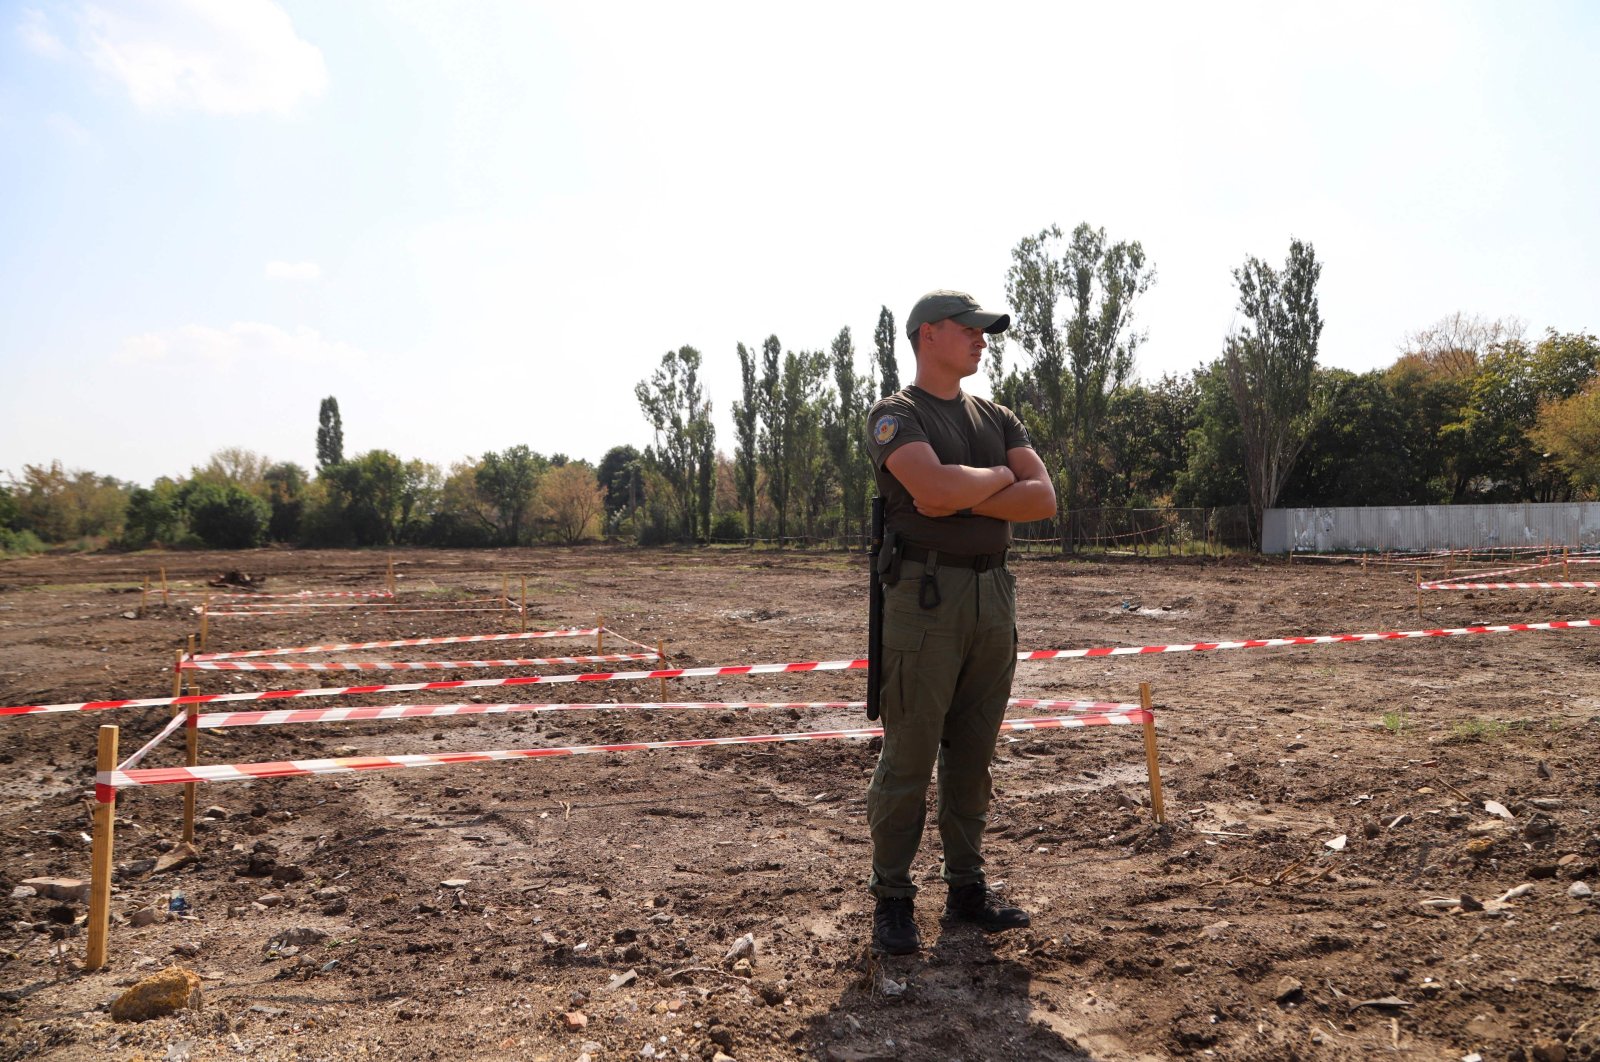 A security person stands guard at the mass graves site discovered on an abandoned area near the city airport where until recently was a dump in Odessa, Ukraine, Aug. 30, 2021. (AFP Photo)